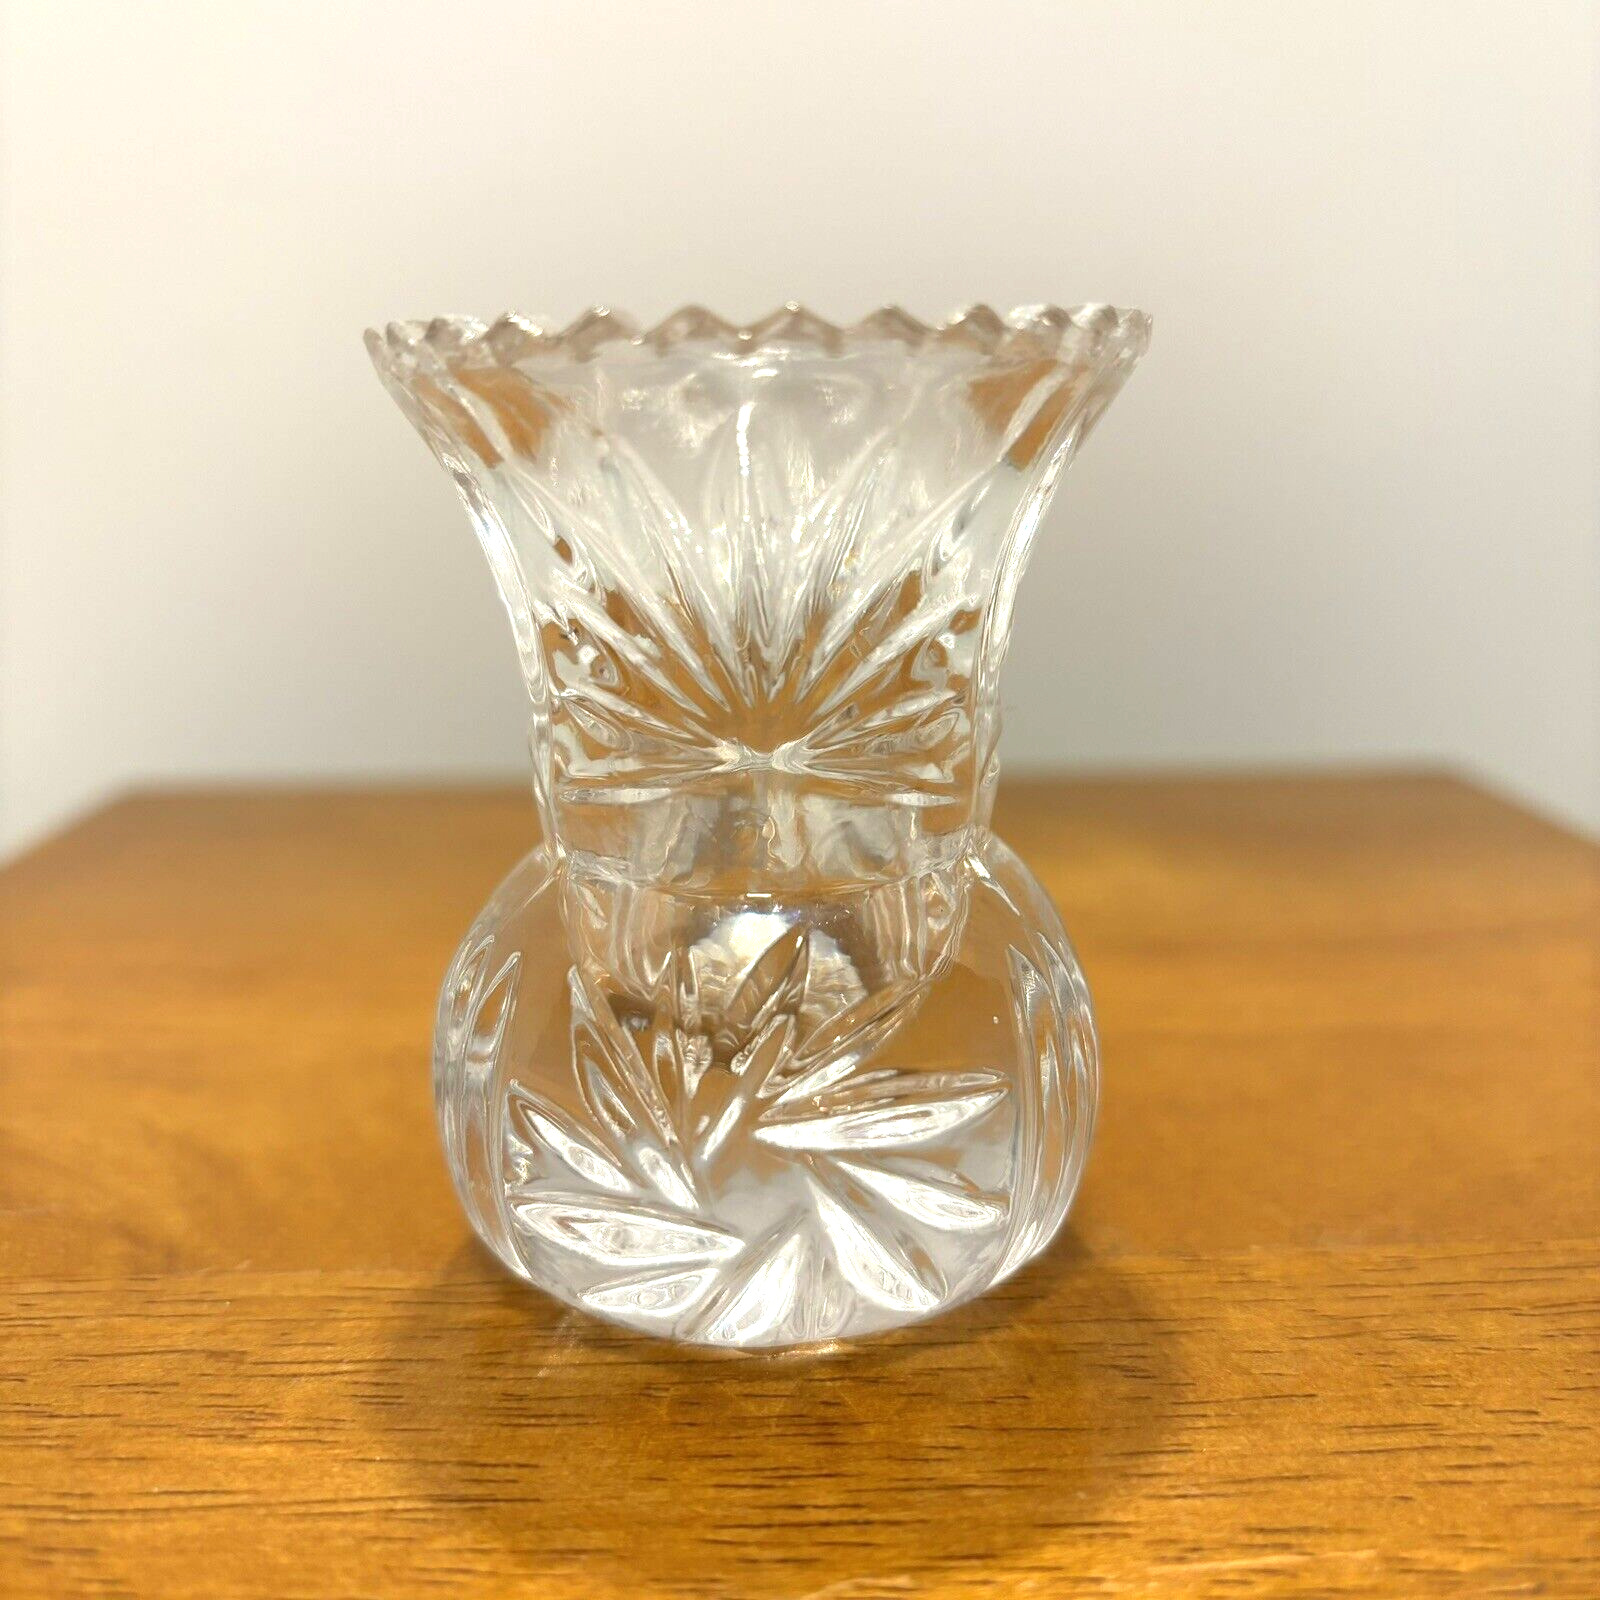 Vintage Lead Crystal Toothpick Holder Clear Glass Pineapple Cut Made in WGermany